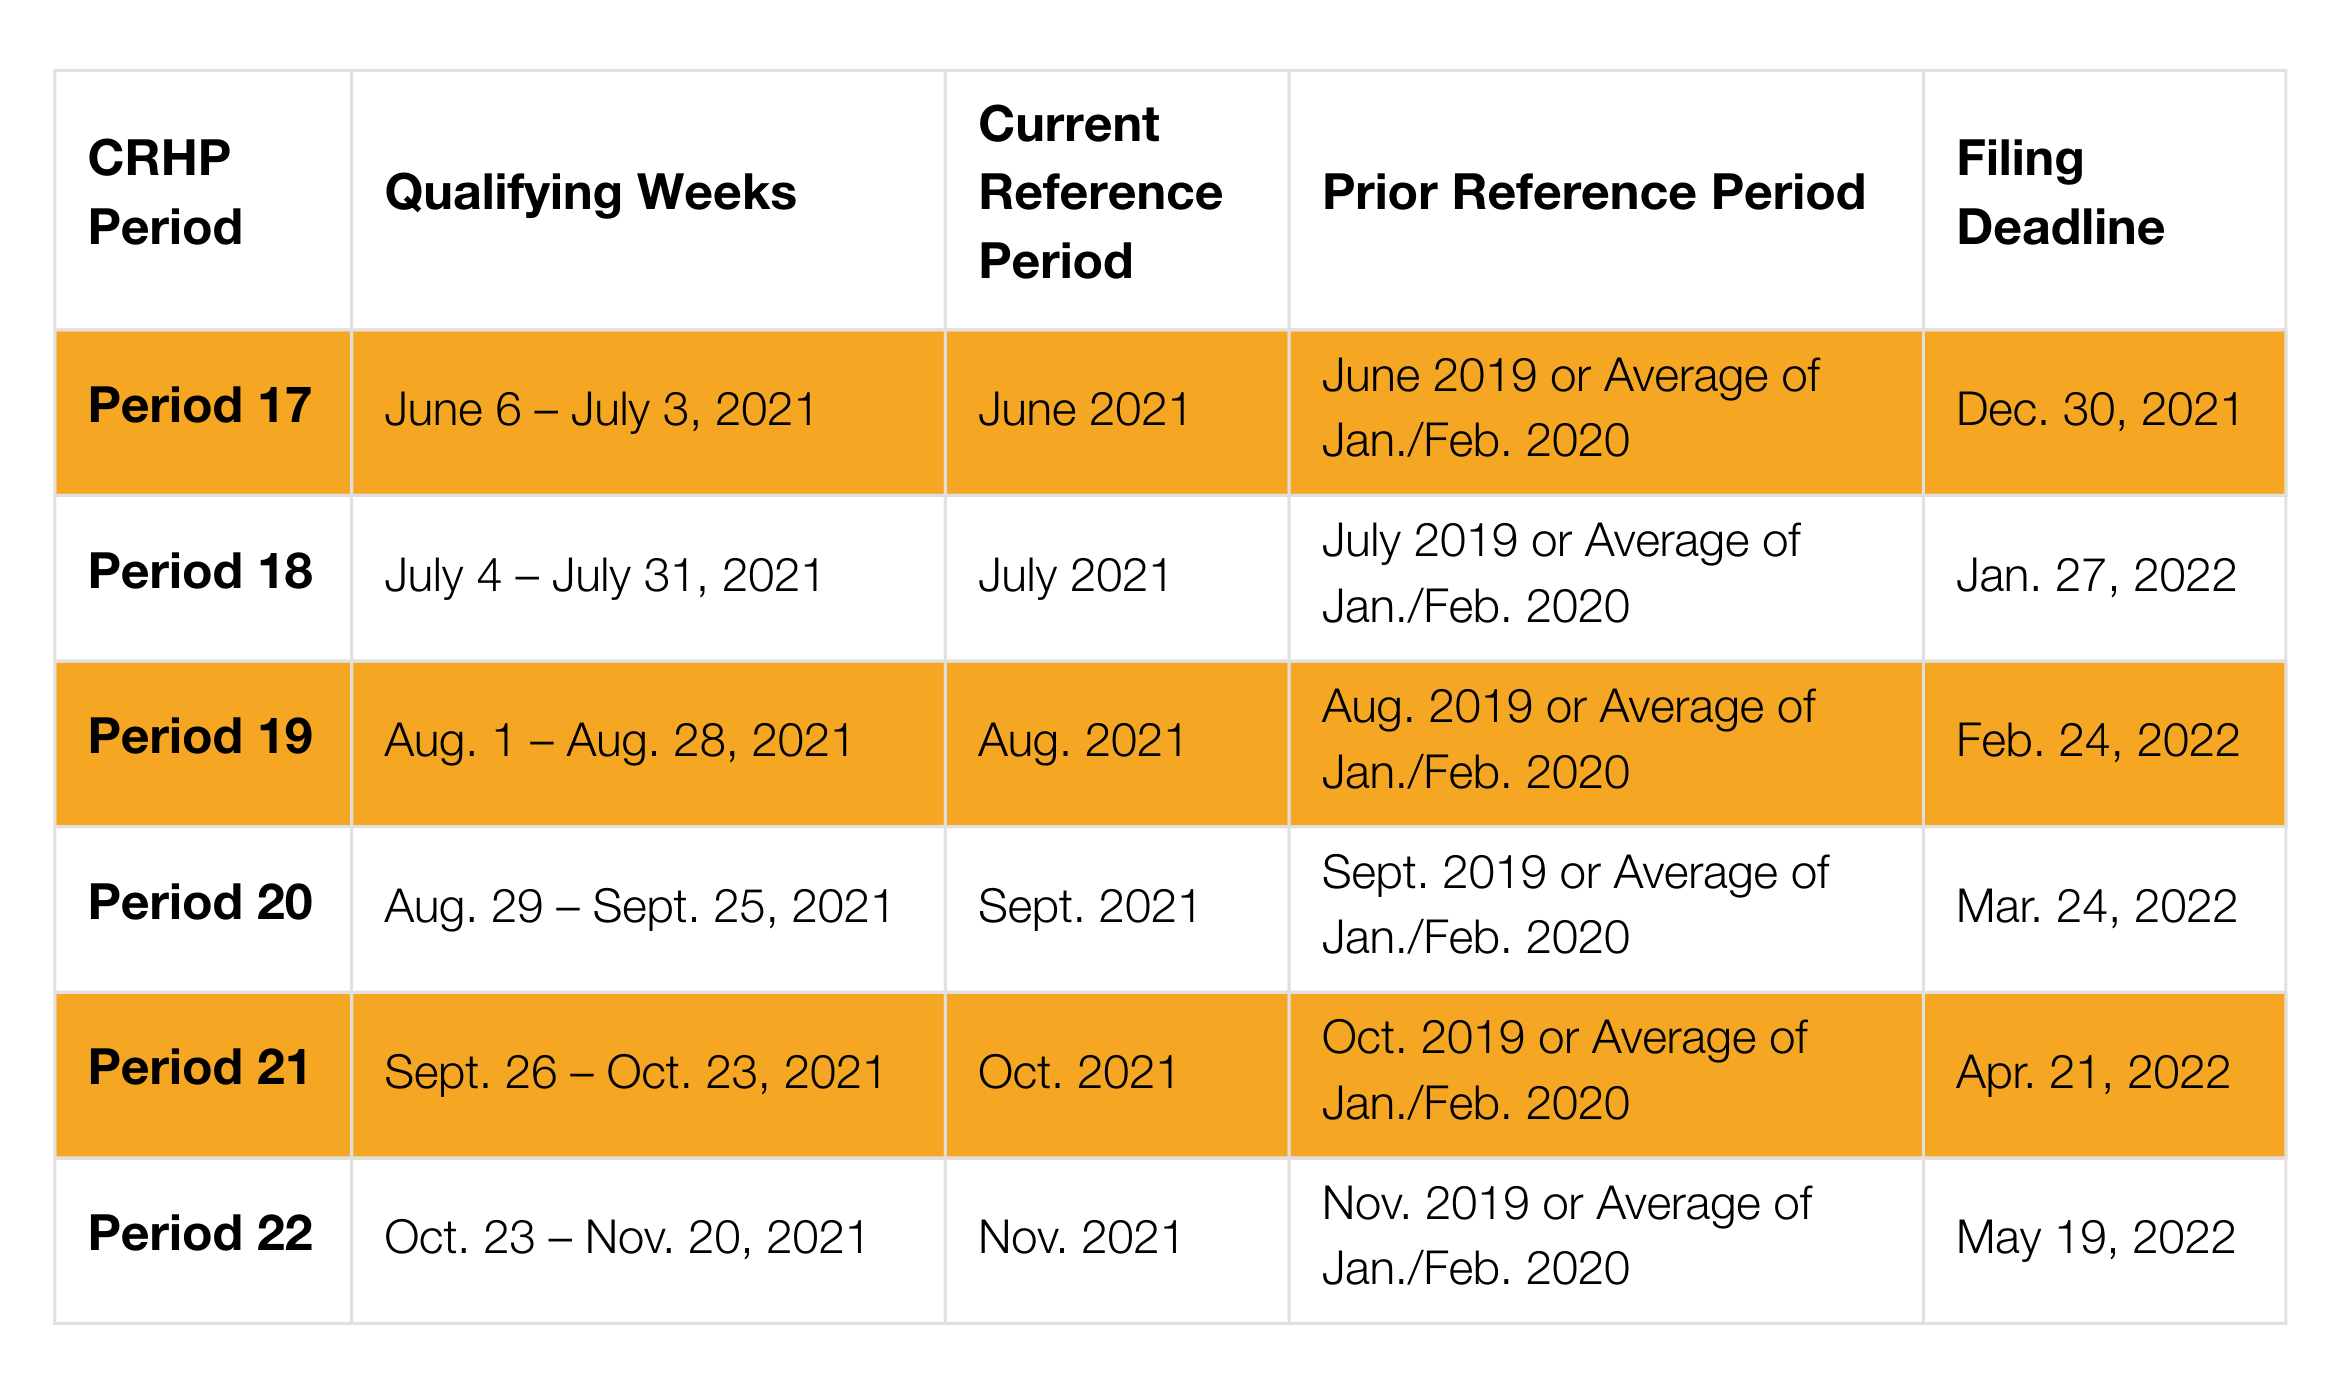 CRHP Reference Periods and Filing Deadlines